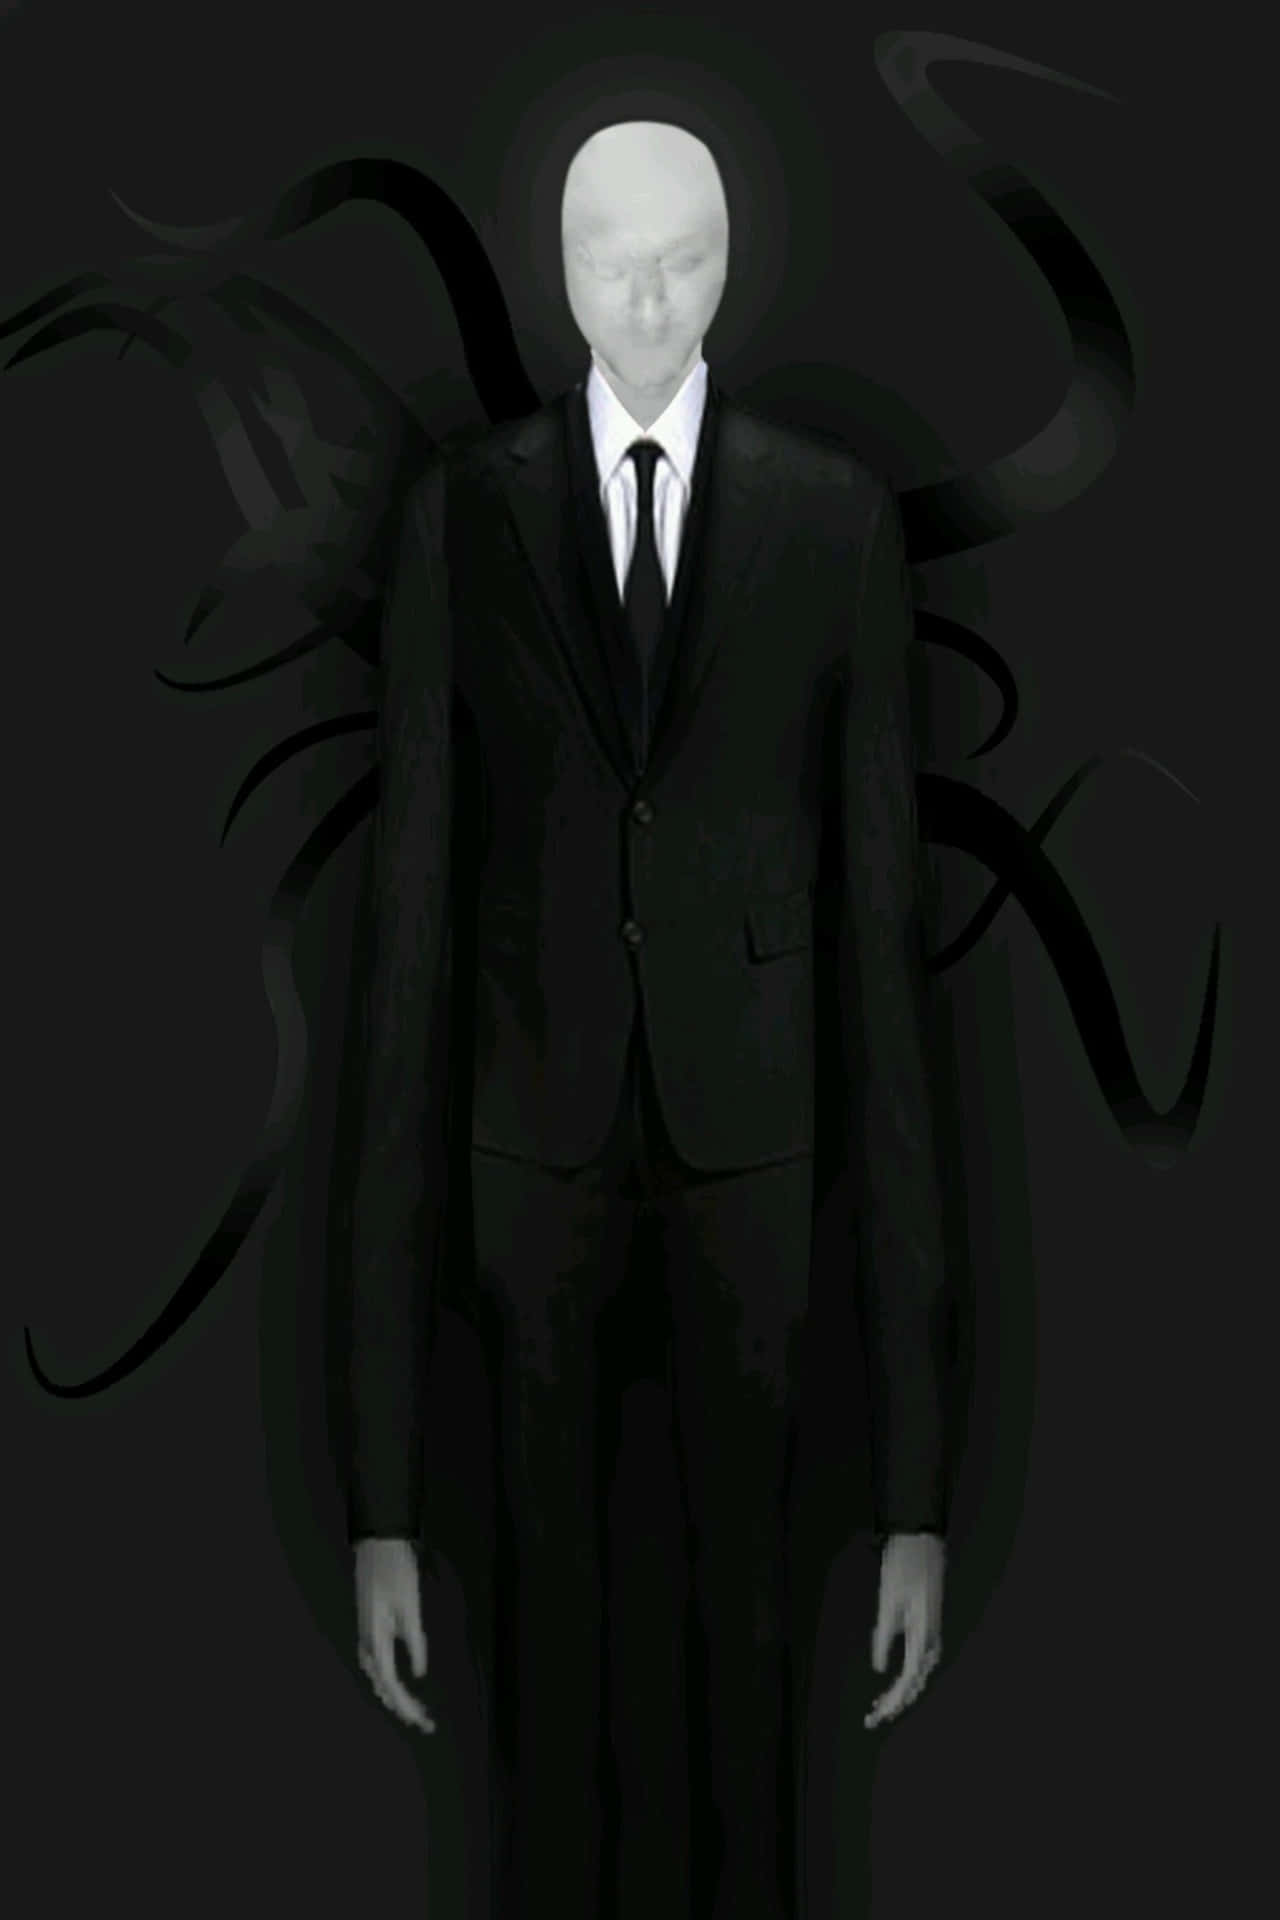 Tall Creepy Slender Man Suit Picture